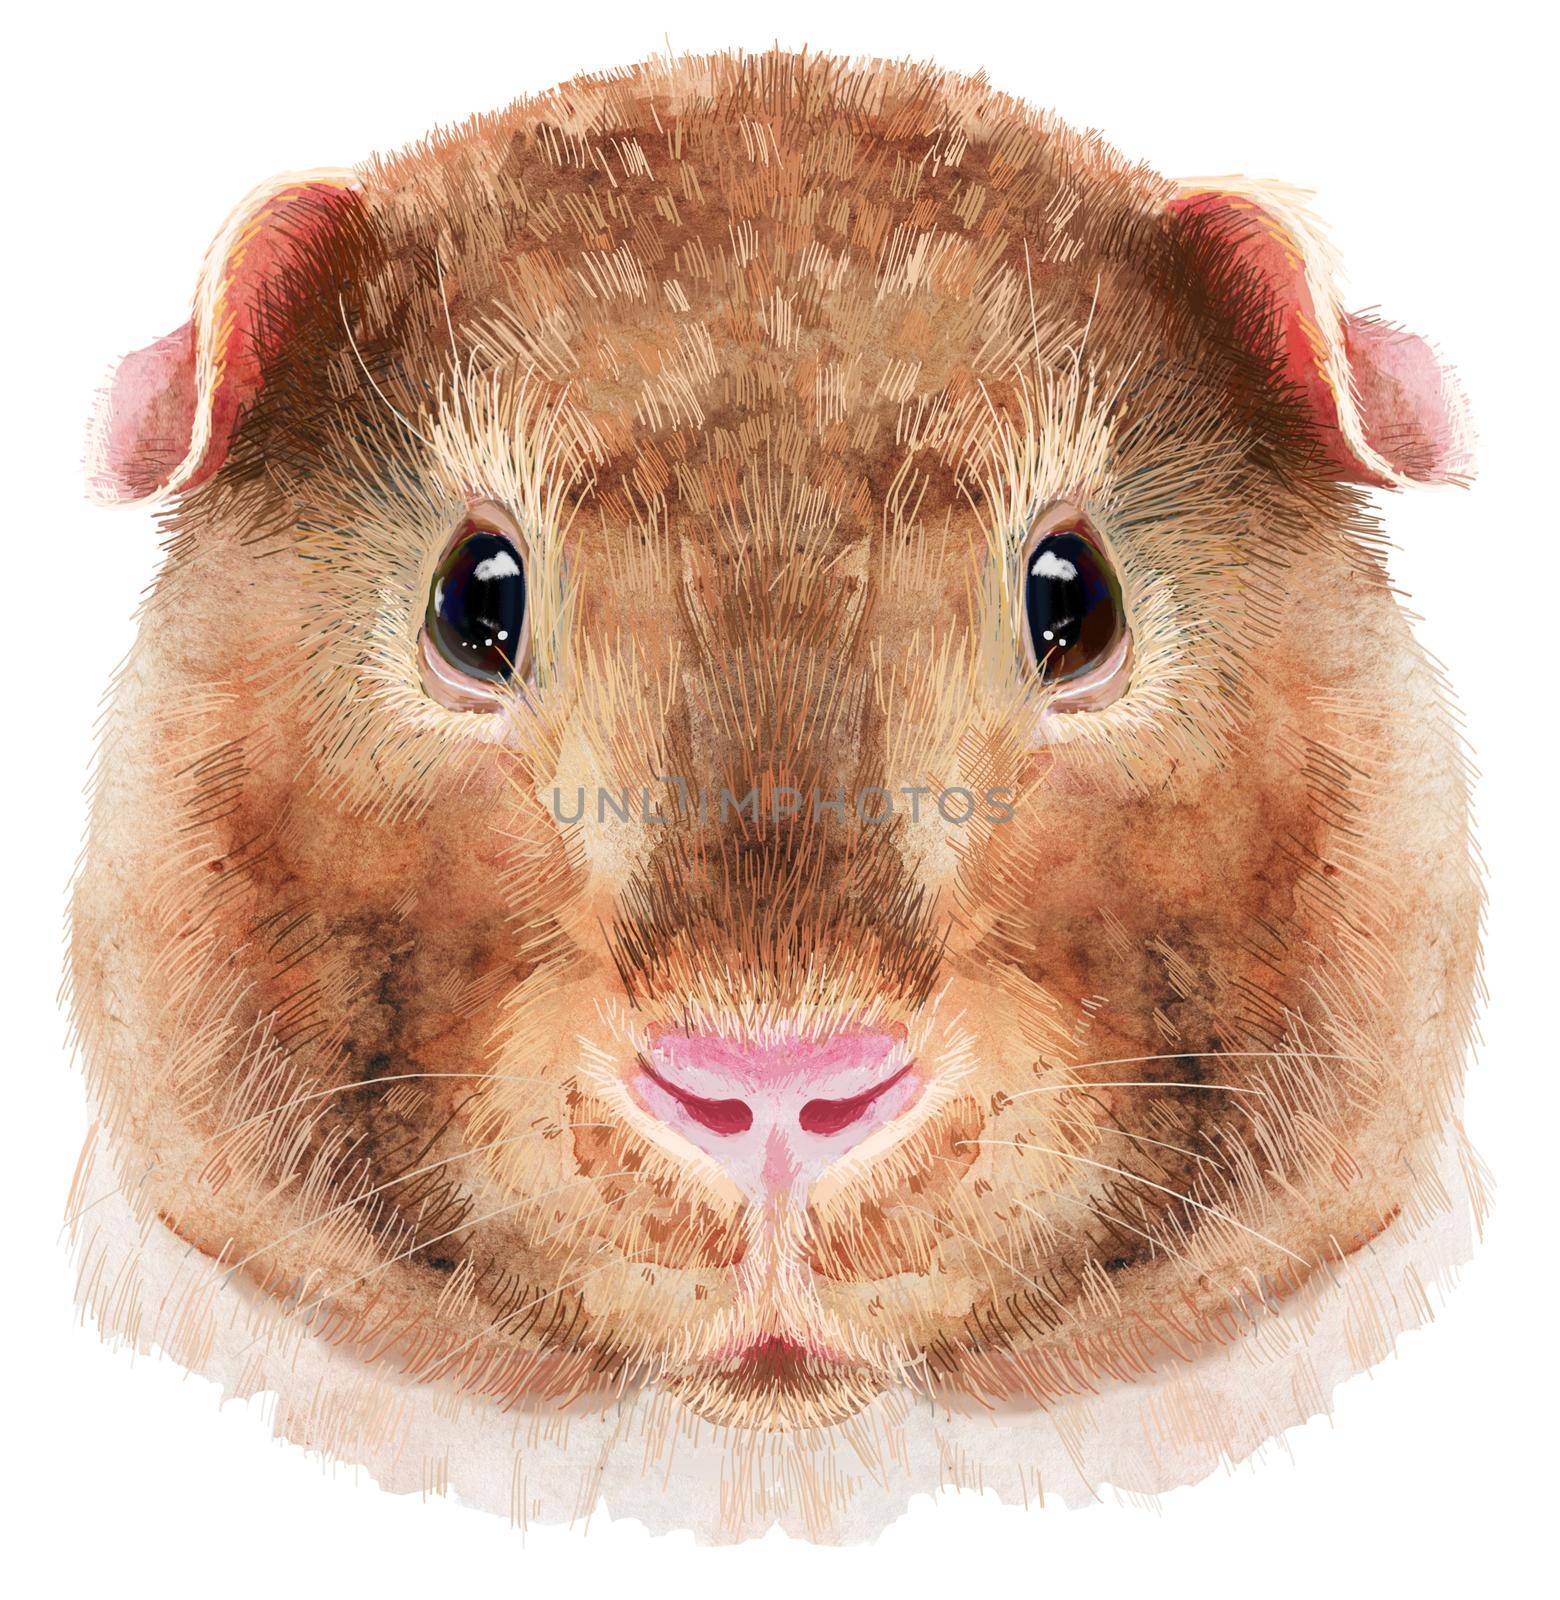 Watercolor portrait of Teddy guinea pig on white background by NataOmsk